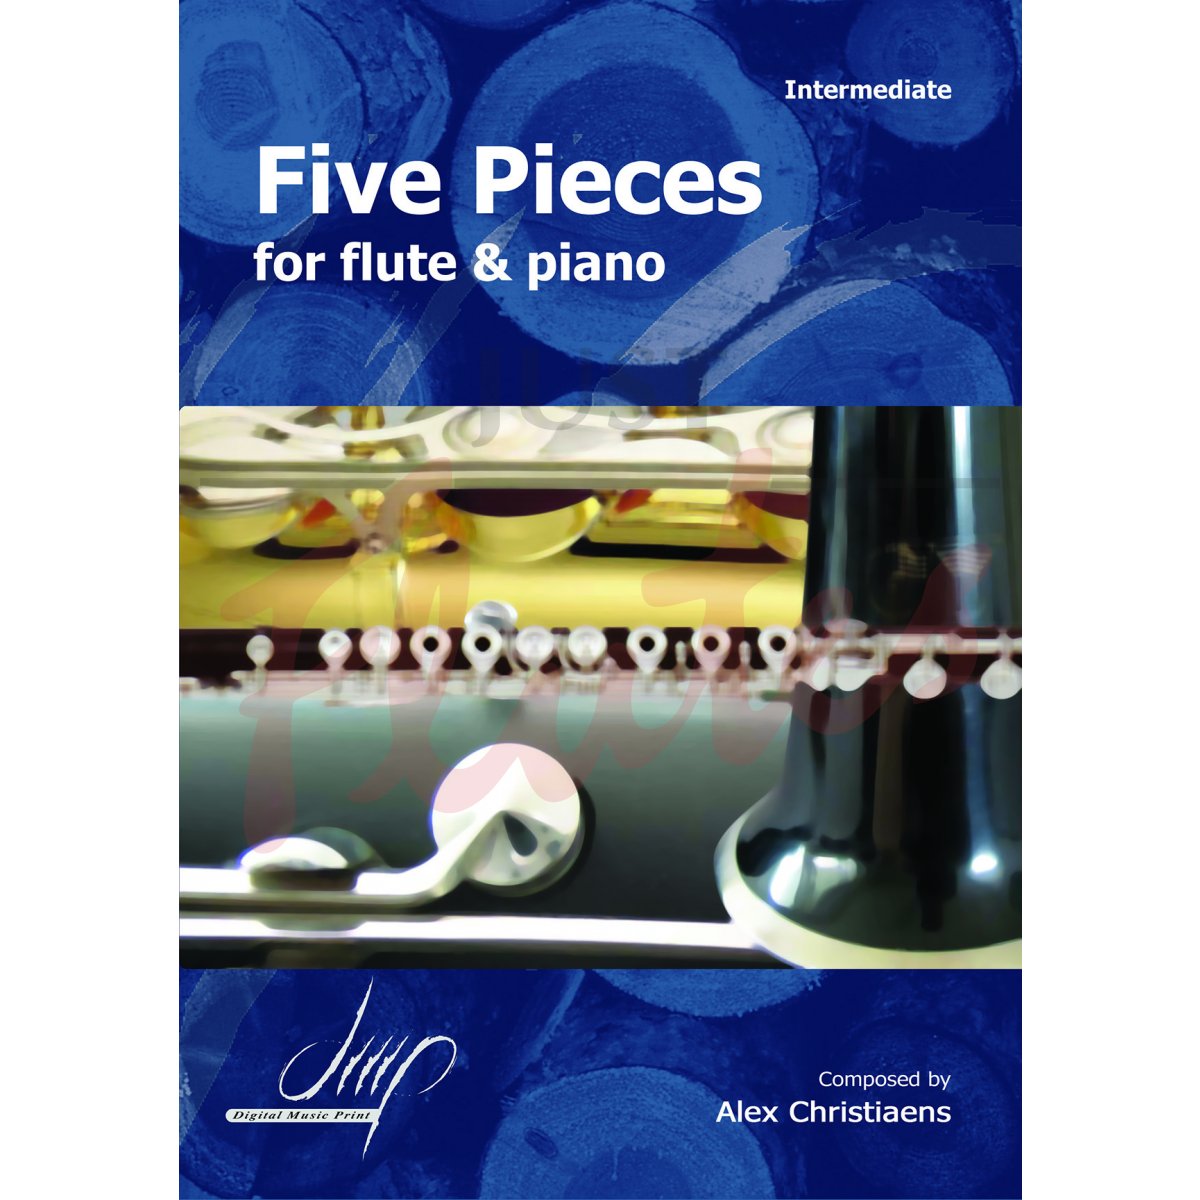 Five pieces for flute and piano